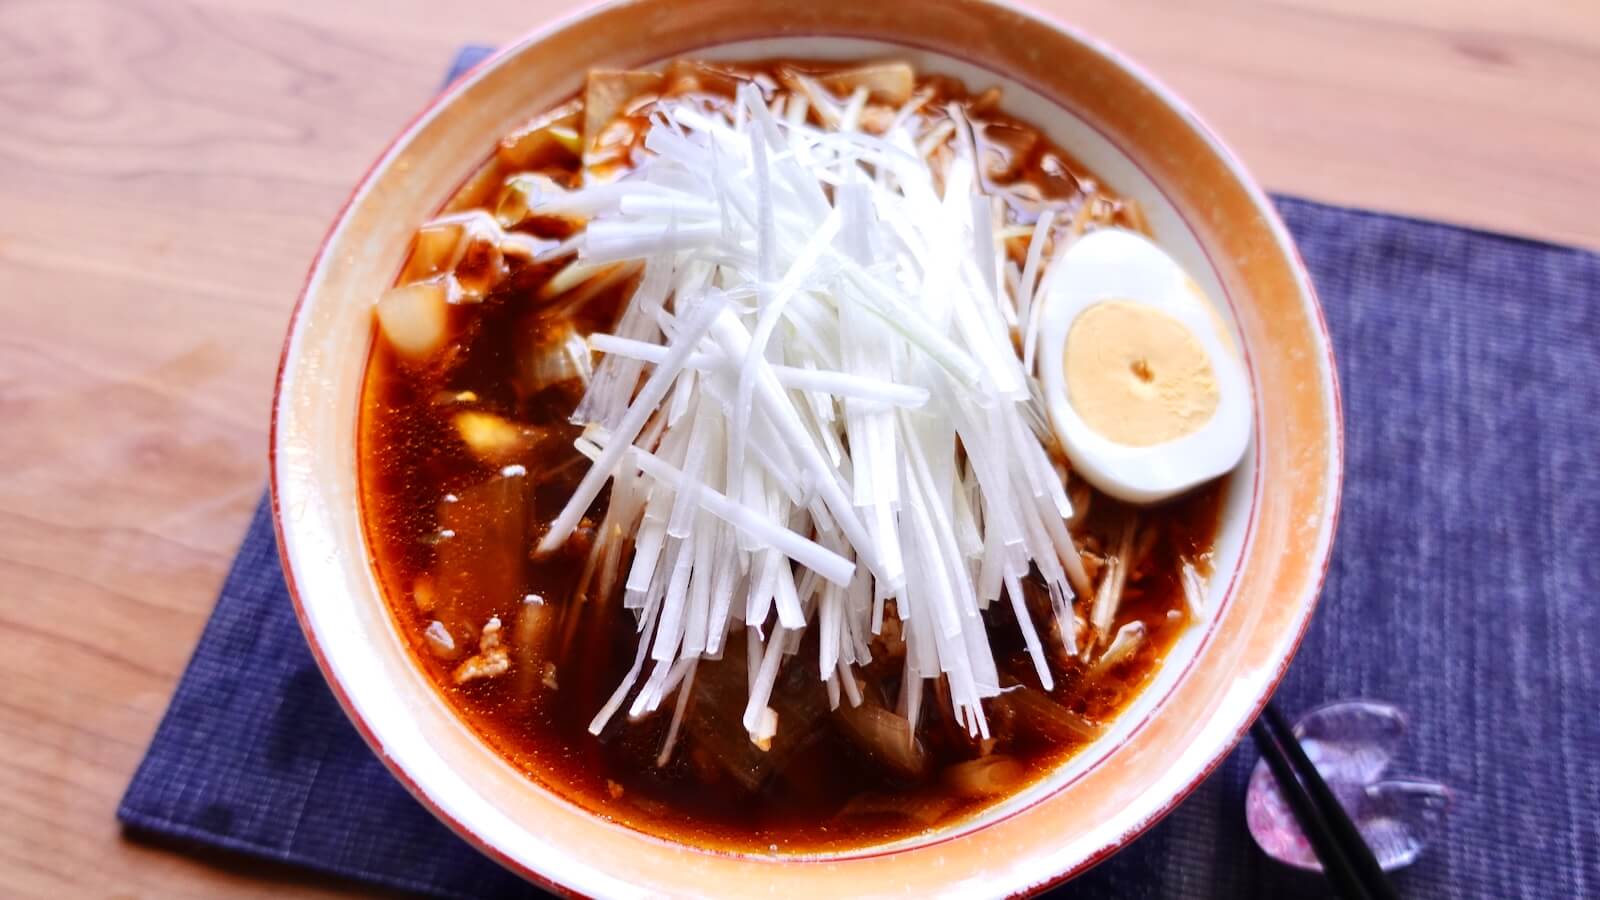 A photo of the Ezawa Katsuura Tantan noodles made from directly above